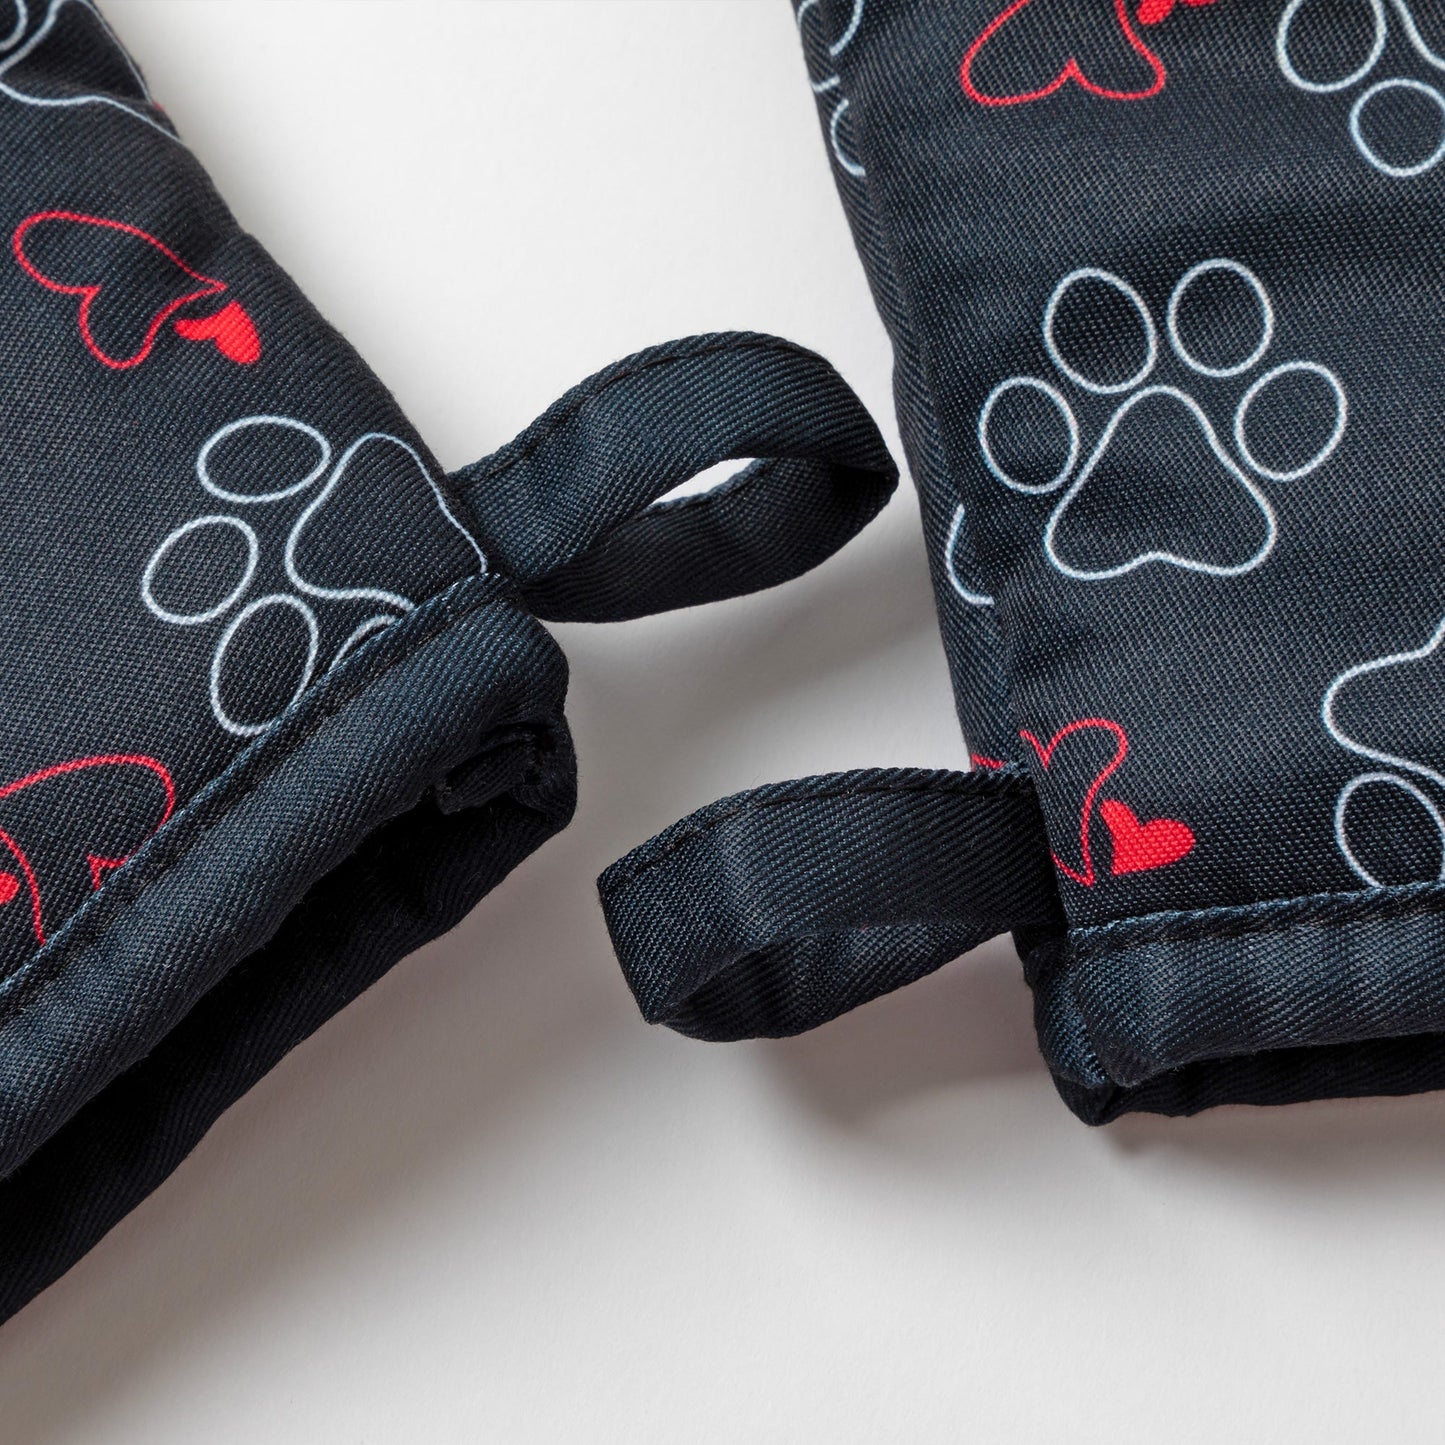 Outlined Paws & Hearts Kitchen Textiles